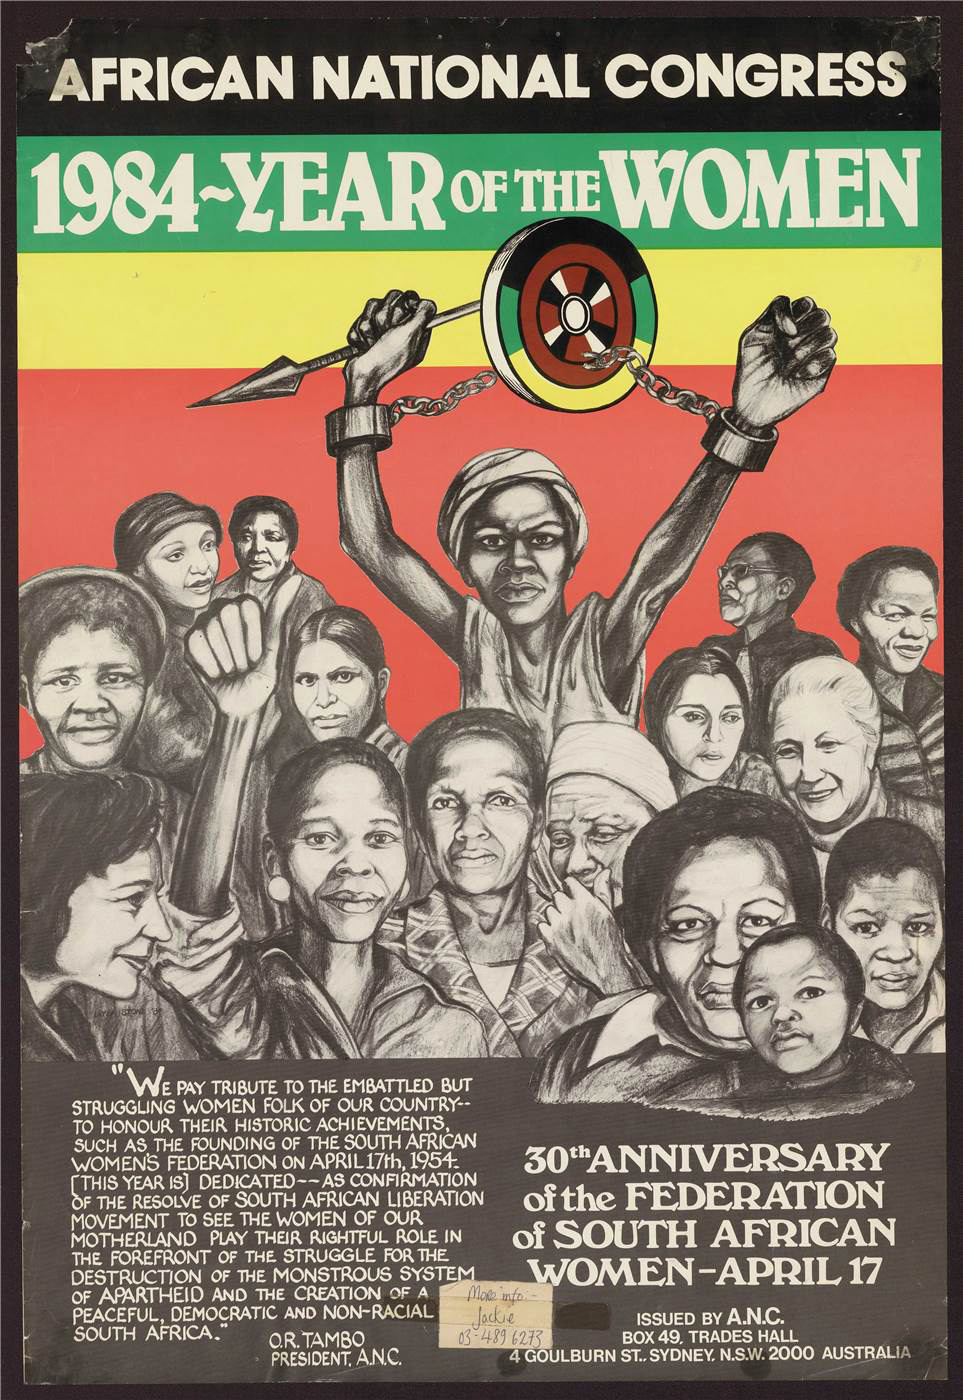 A poster for the African National Congress shows a sketch of 16 Black women mostly smiling. One is raising her arms, trying to free her wrists of handcuffs.